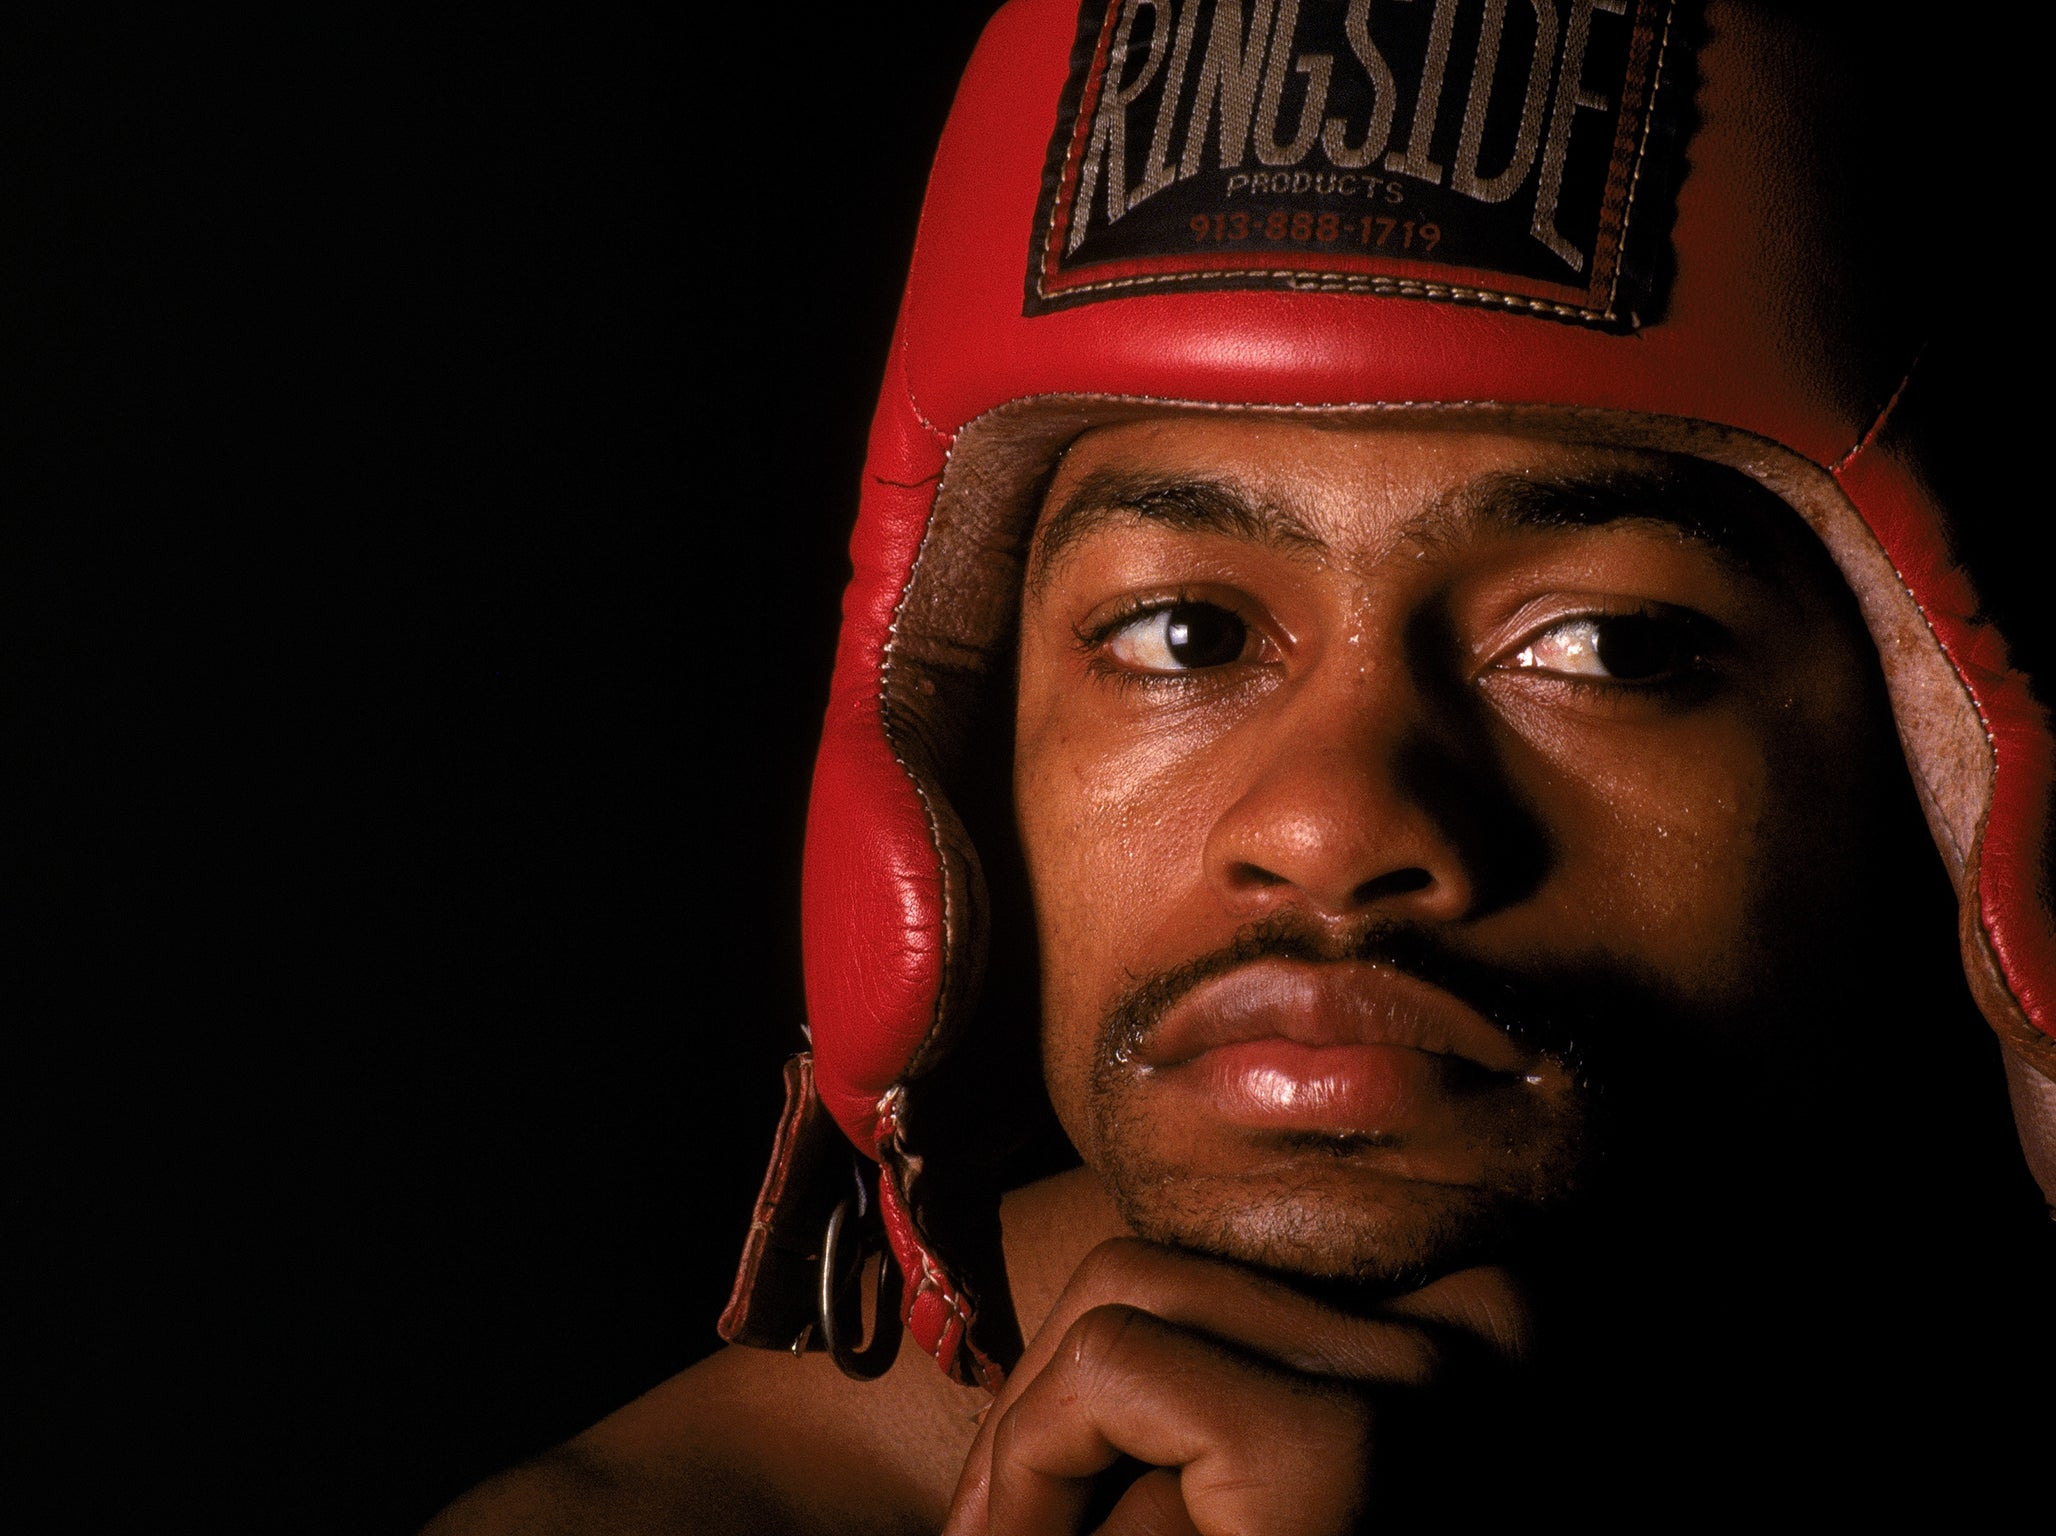 Roy Jones Jr at the beginning of his career, before the nine painful defeats